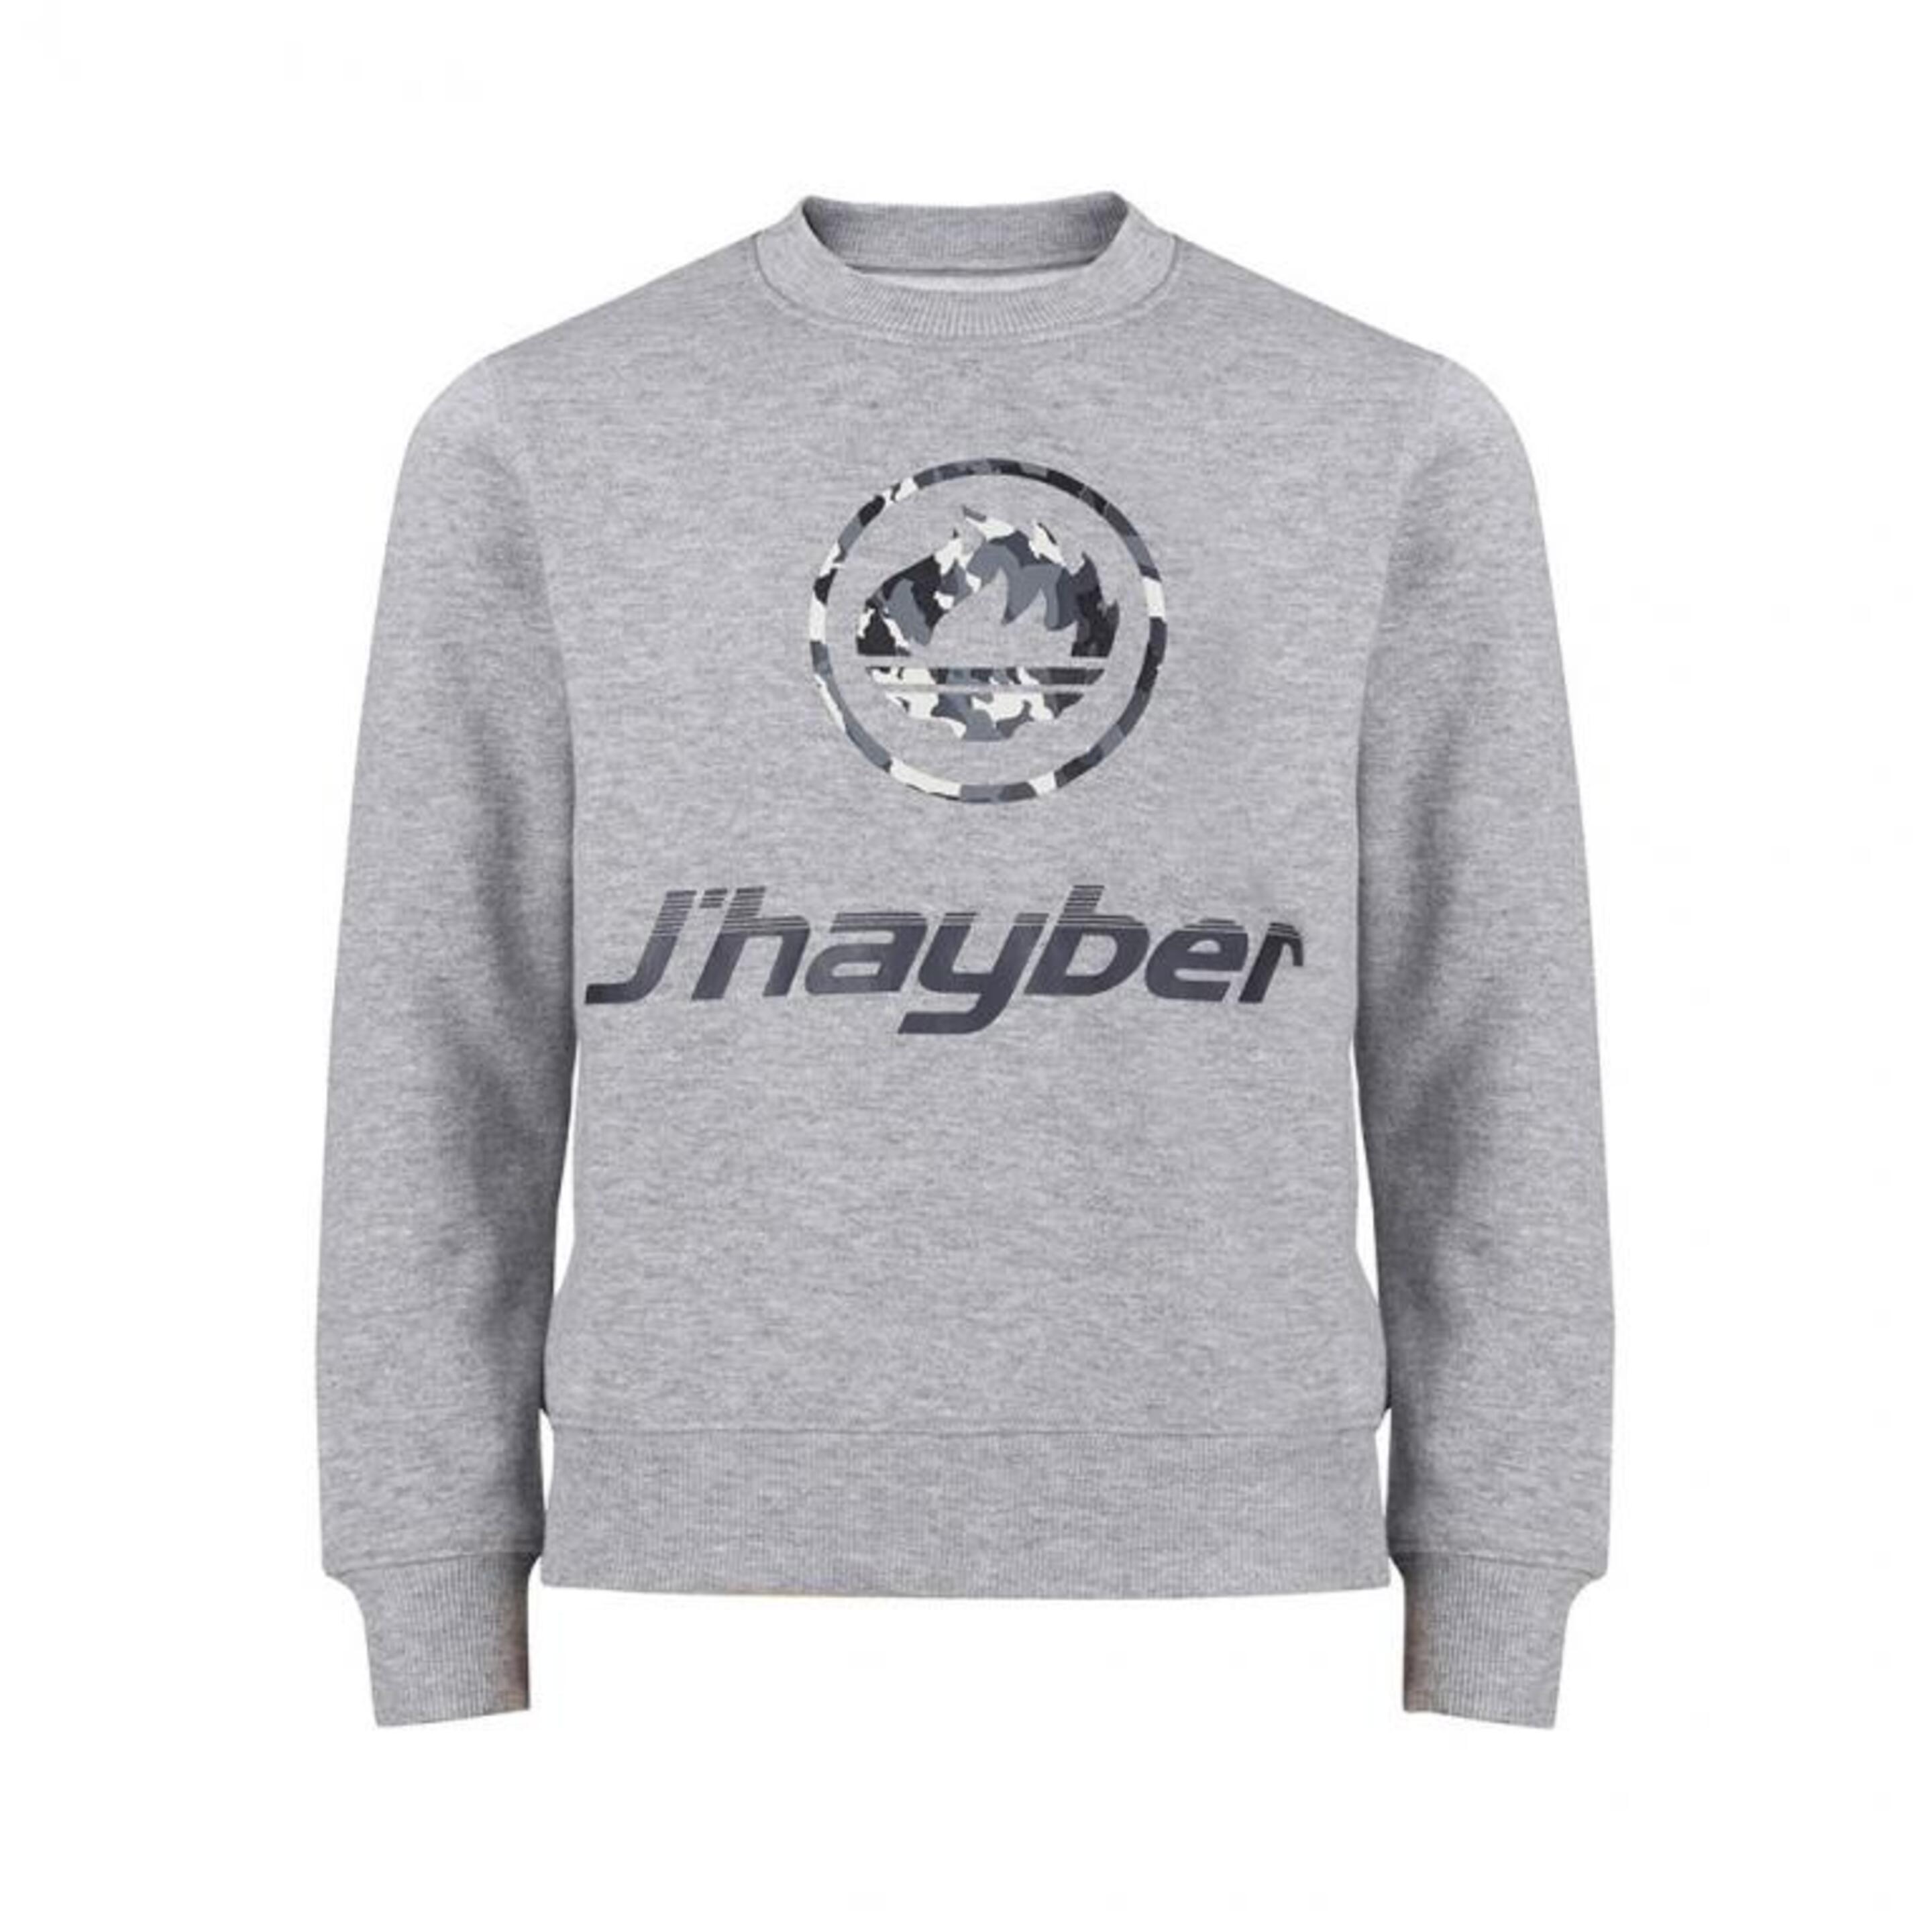 Sudadera Outlet J'hayber Dn2741